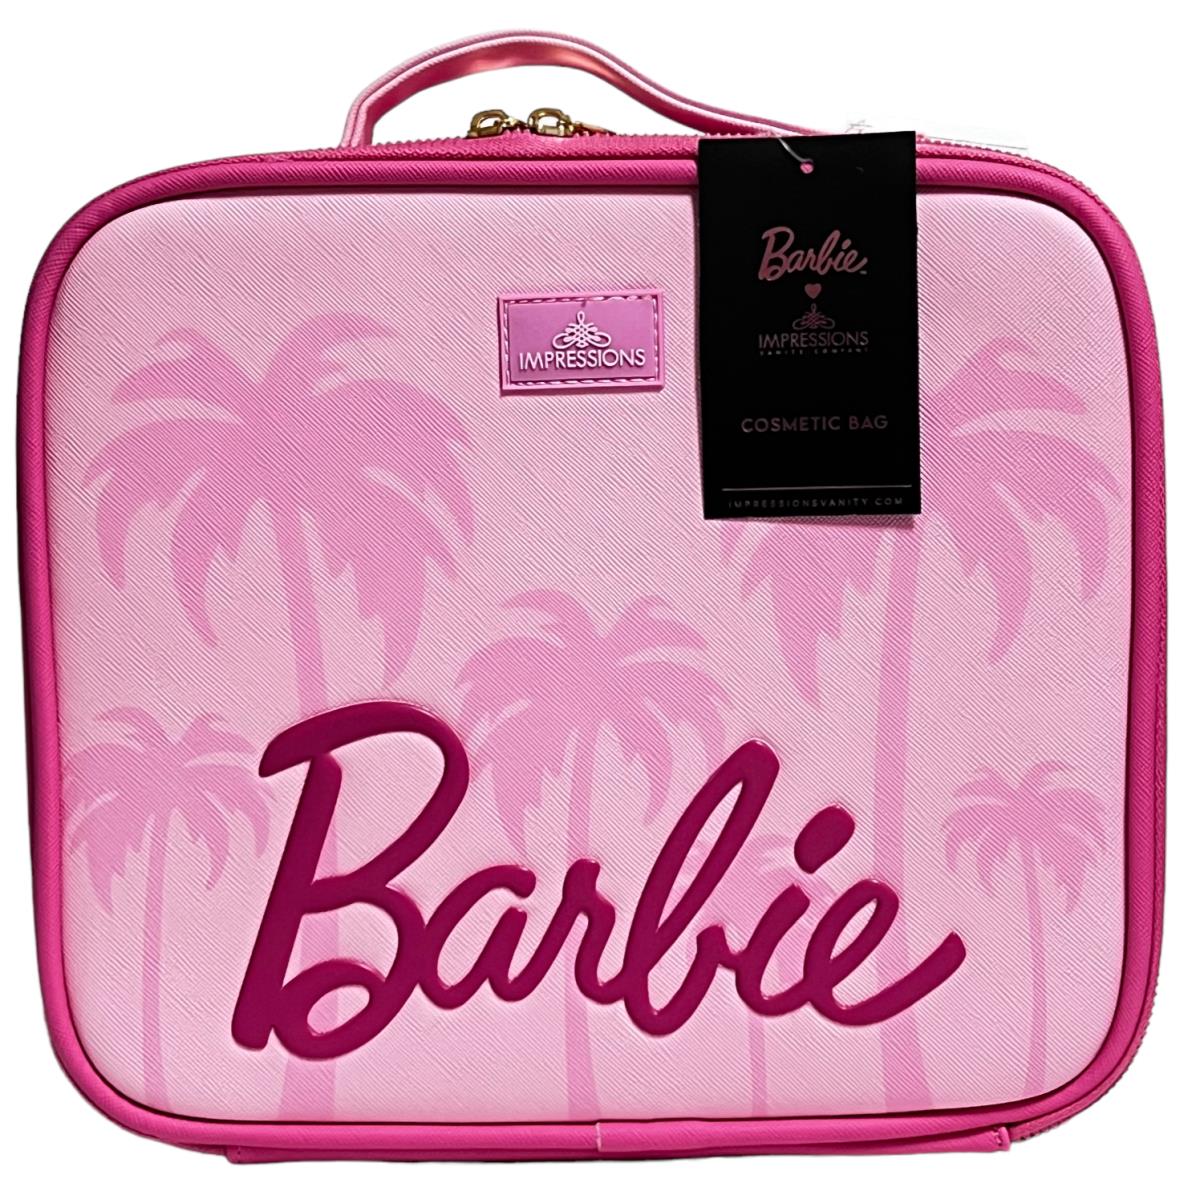 Barbie Cosmetic Bag by Impressions Zippered Pockets Adjustable Dividers 11x10x4